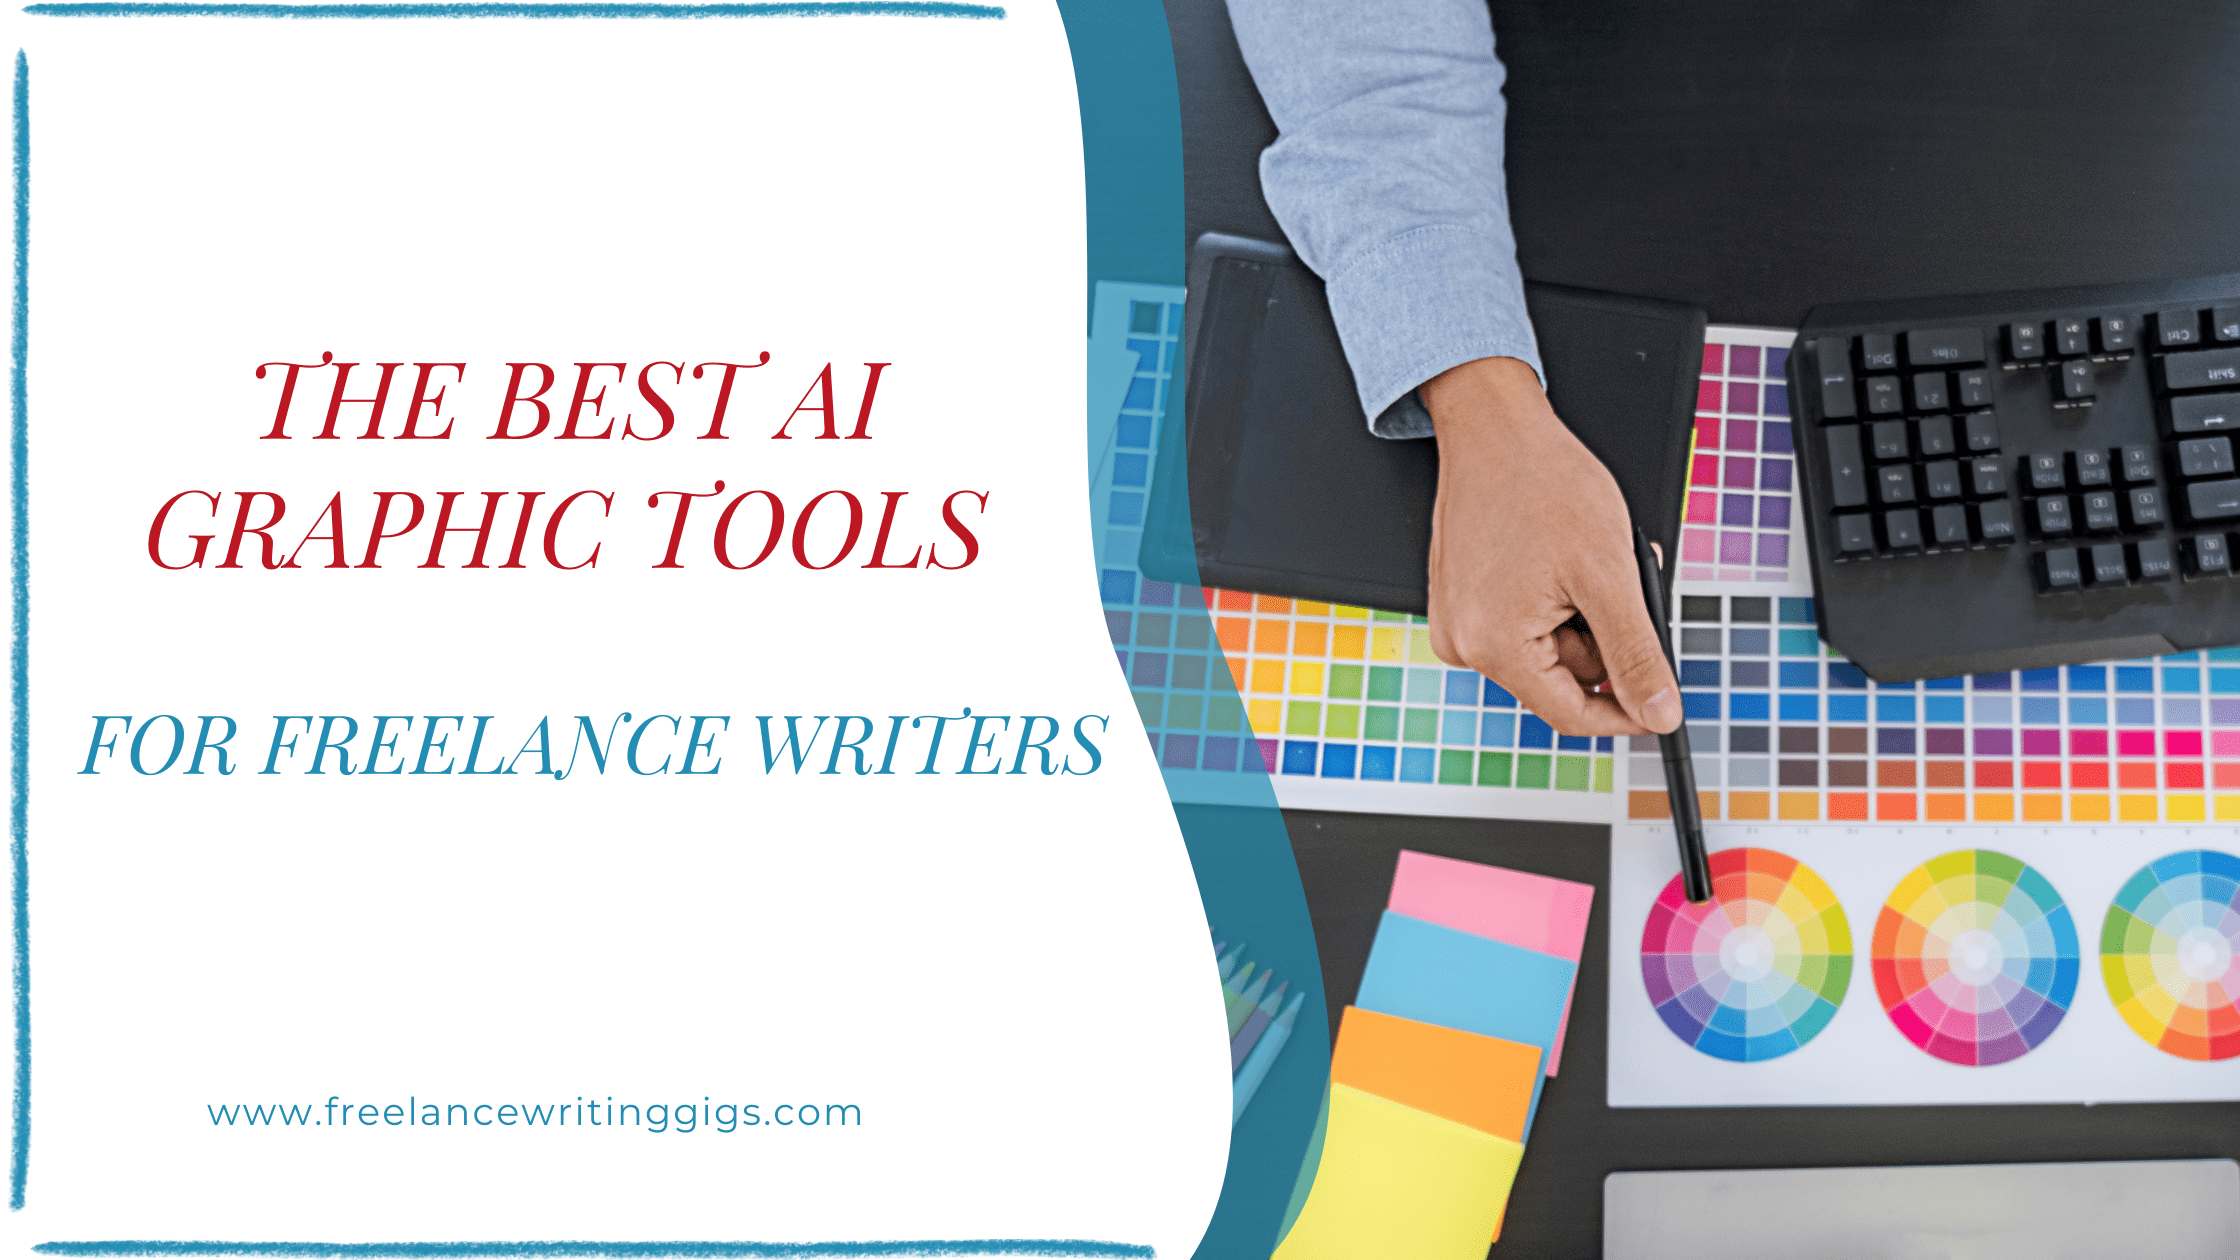 The Best AI Graphic Tools for Freelance Writers